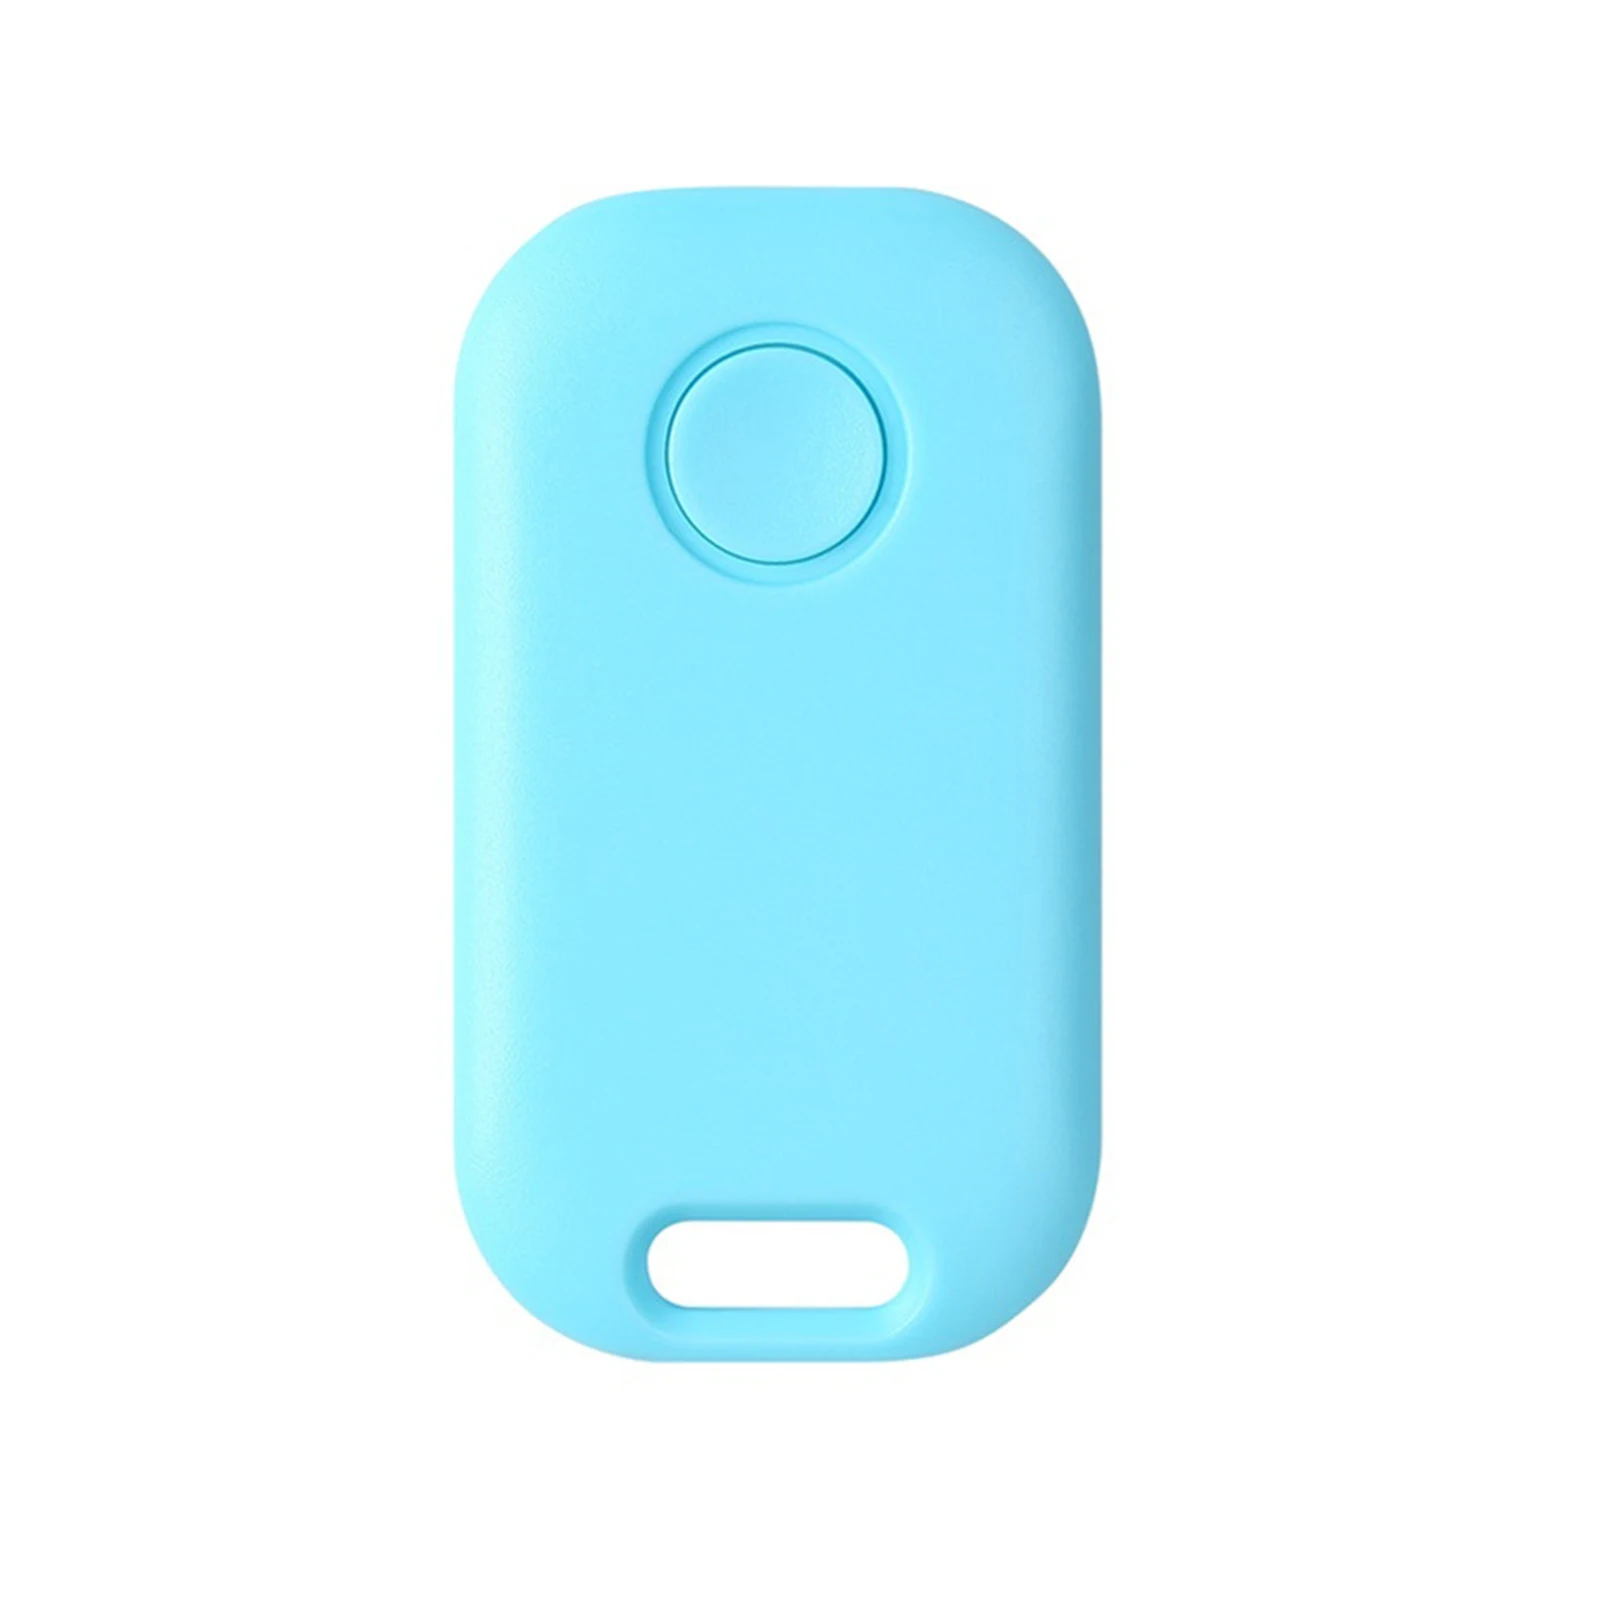 

Mini Tracking Device Bluetooth-Compatible V4 0 App Locating with Alert Remote Selfie Shutter for Pet Wallets Backpacks